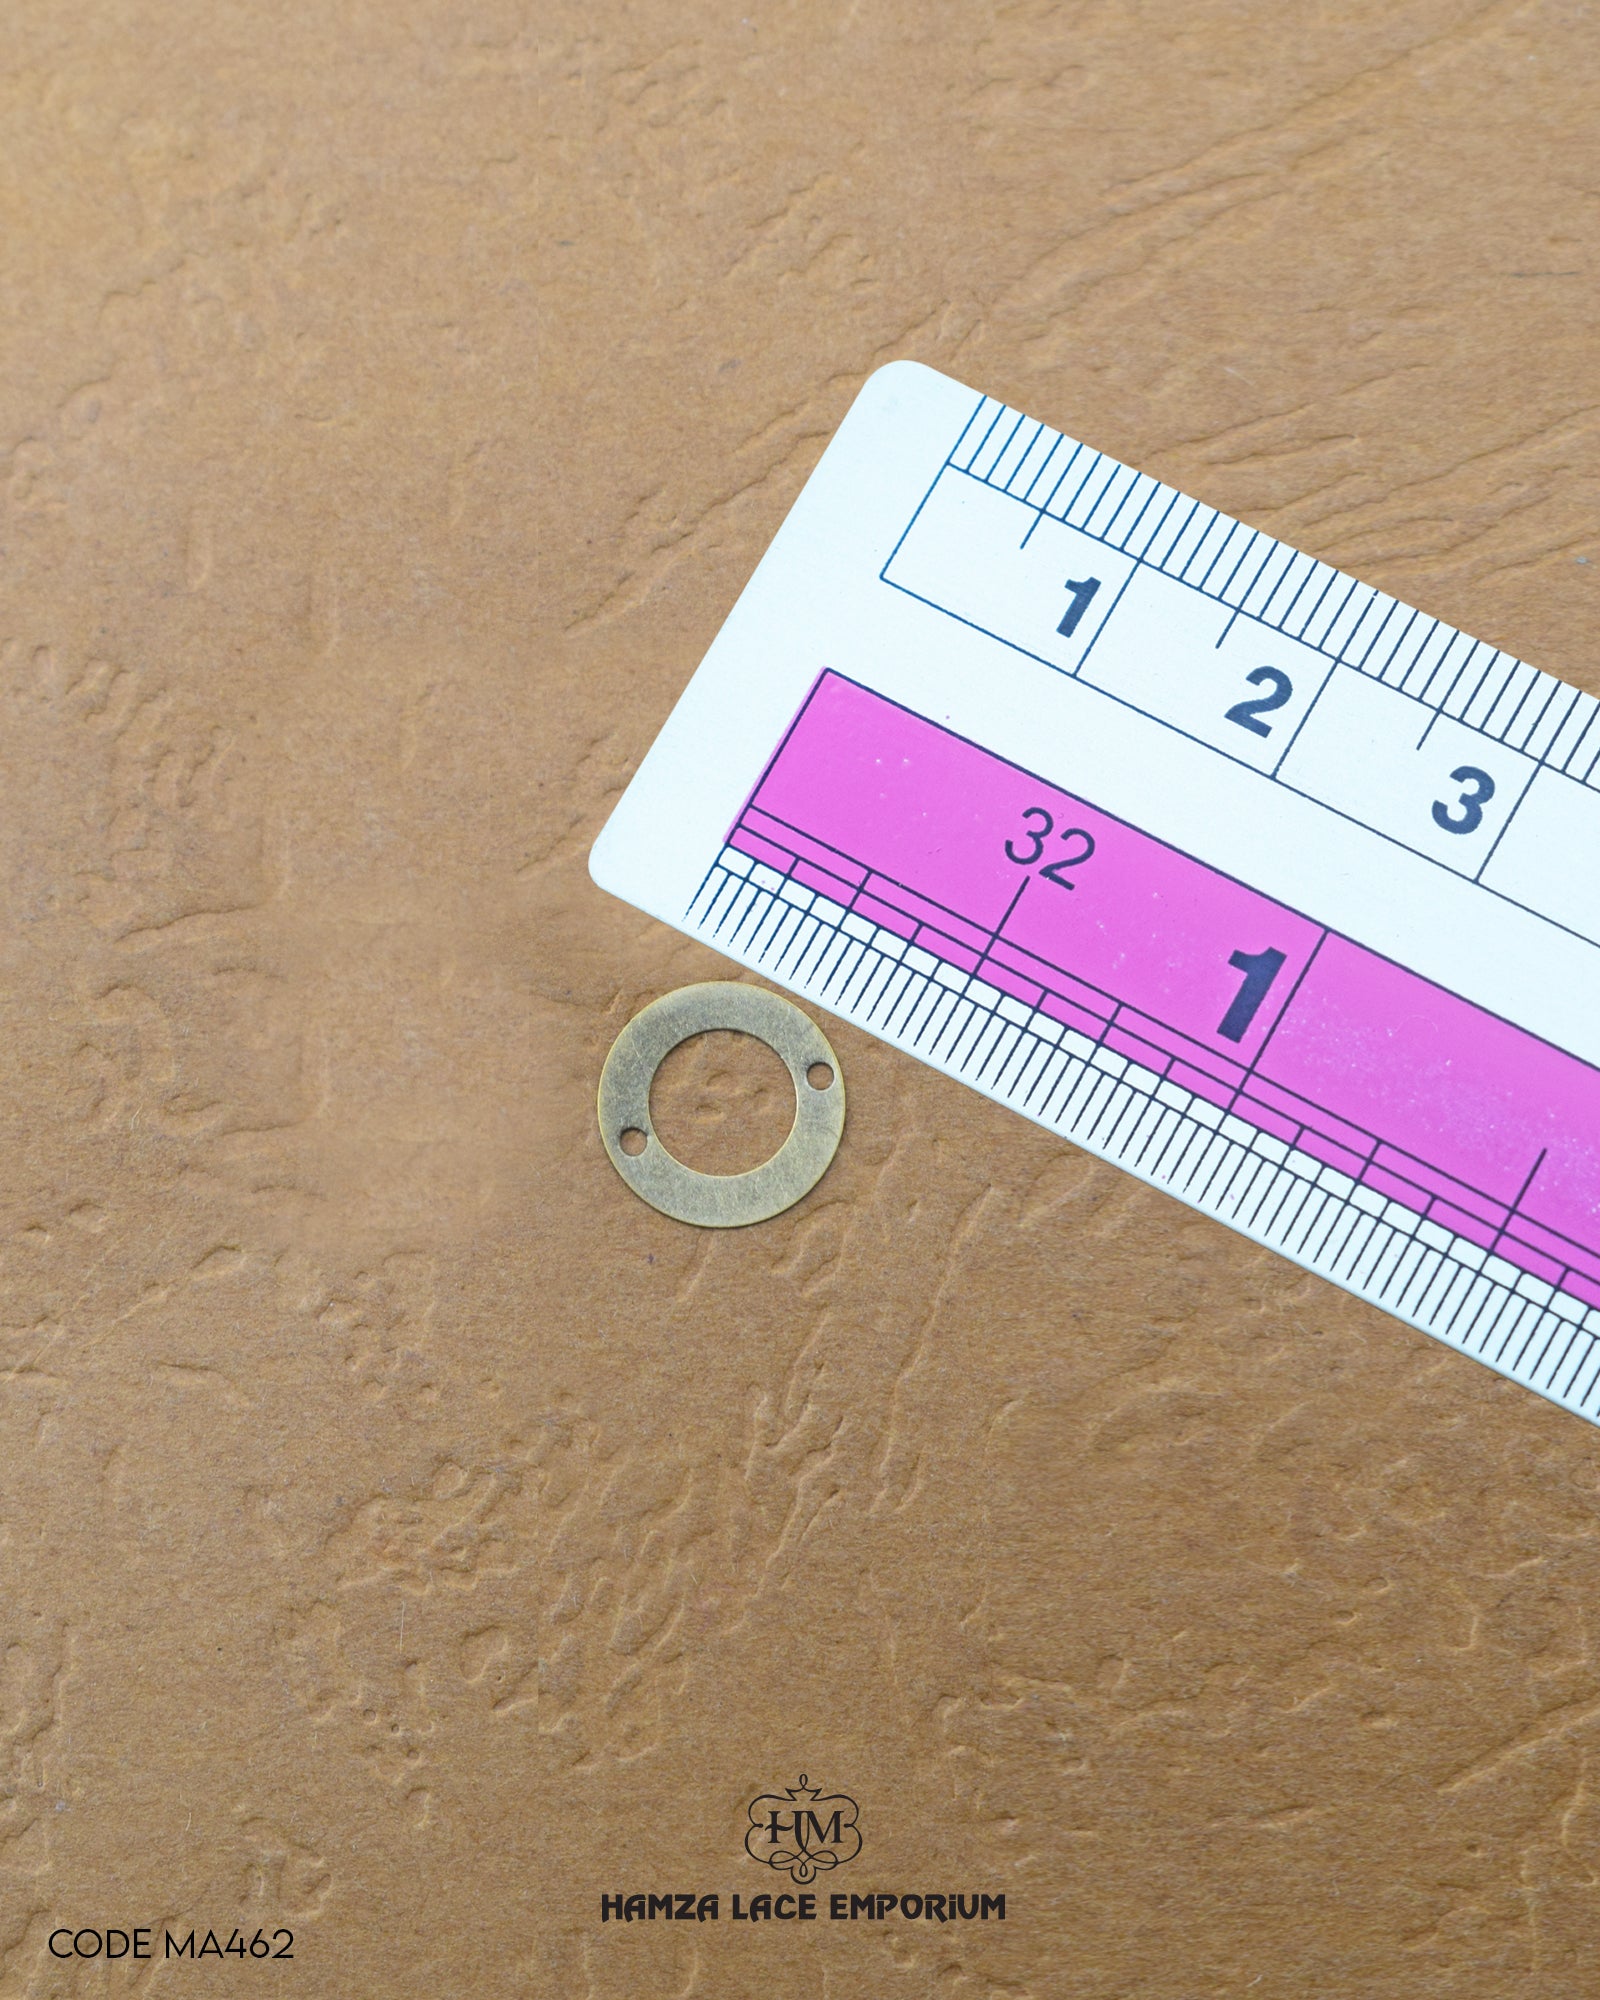 The size of the Beautifully designed 'Ring Shape Accessory MA462' is measured by using a ruler